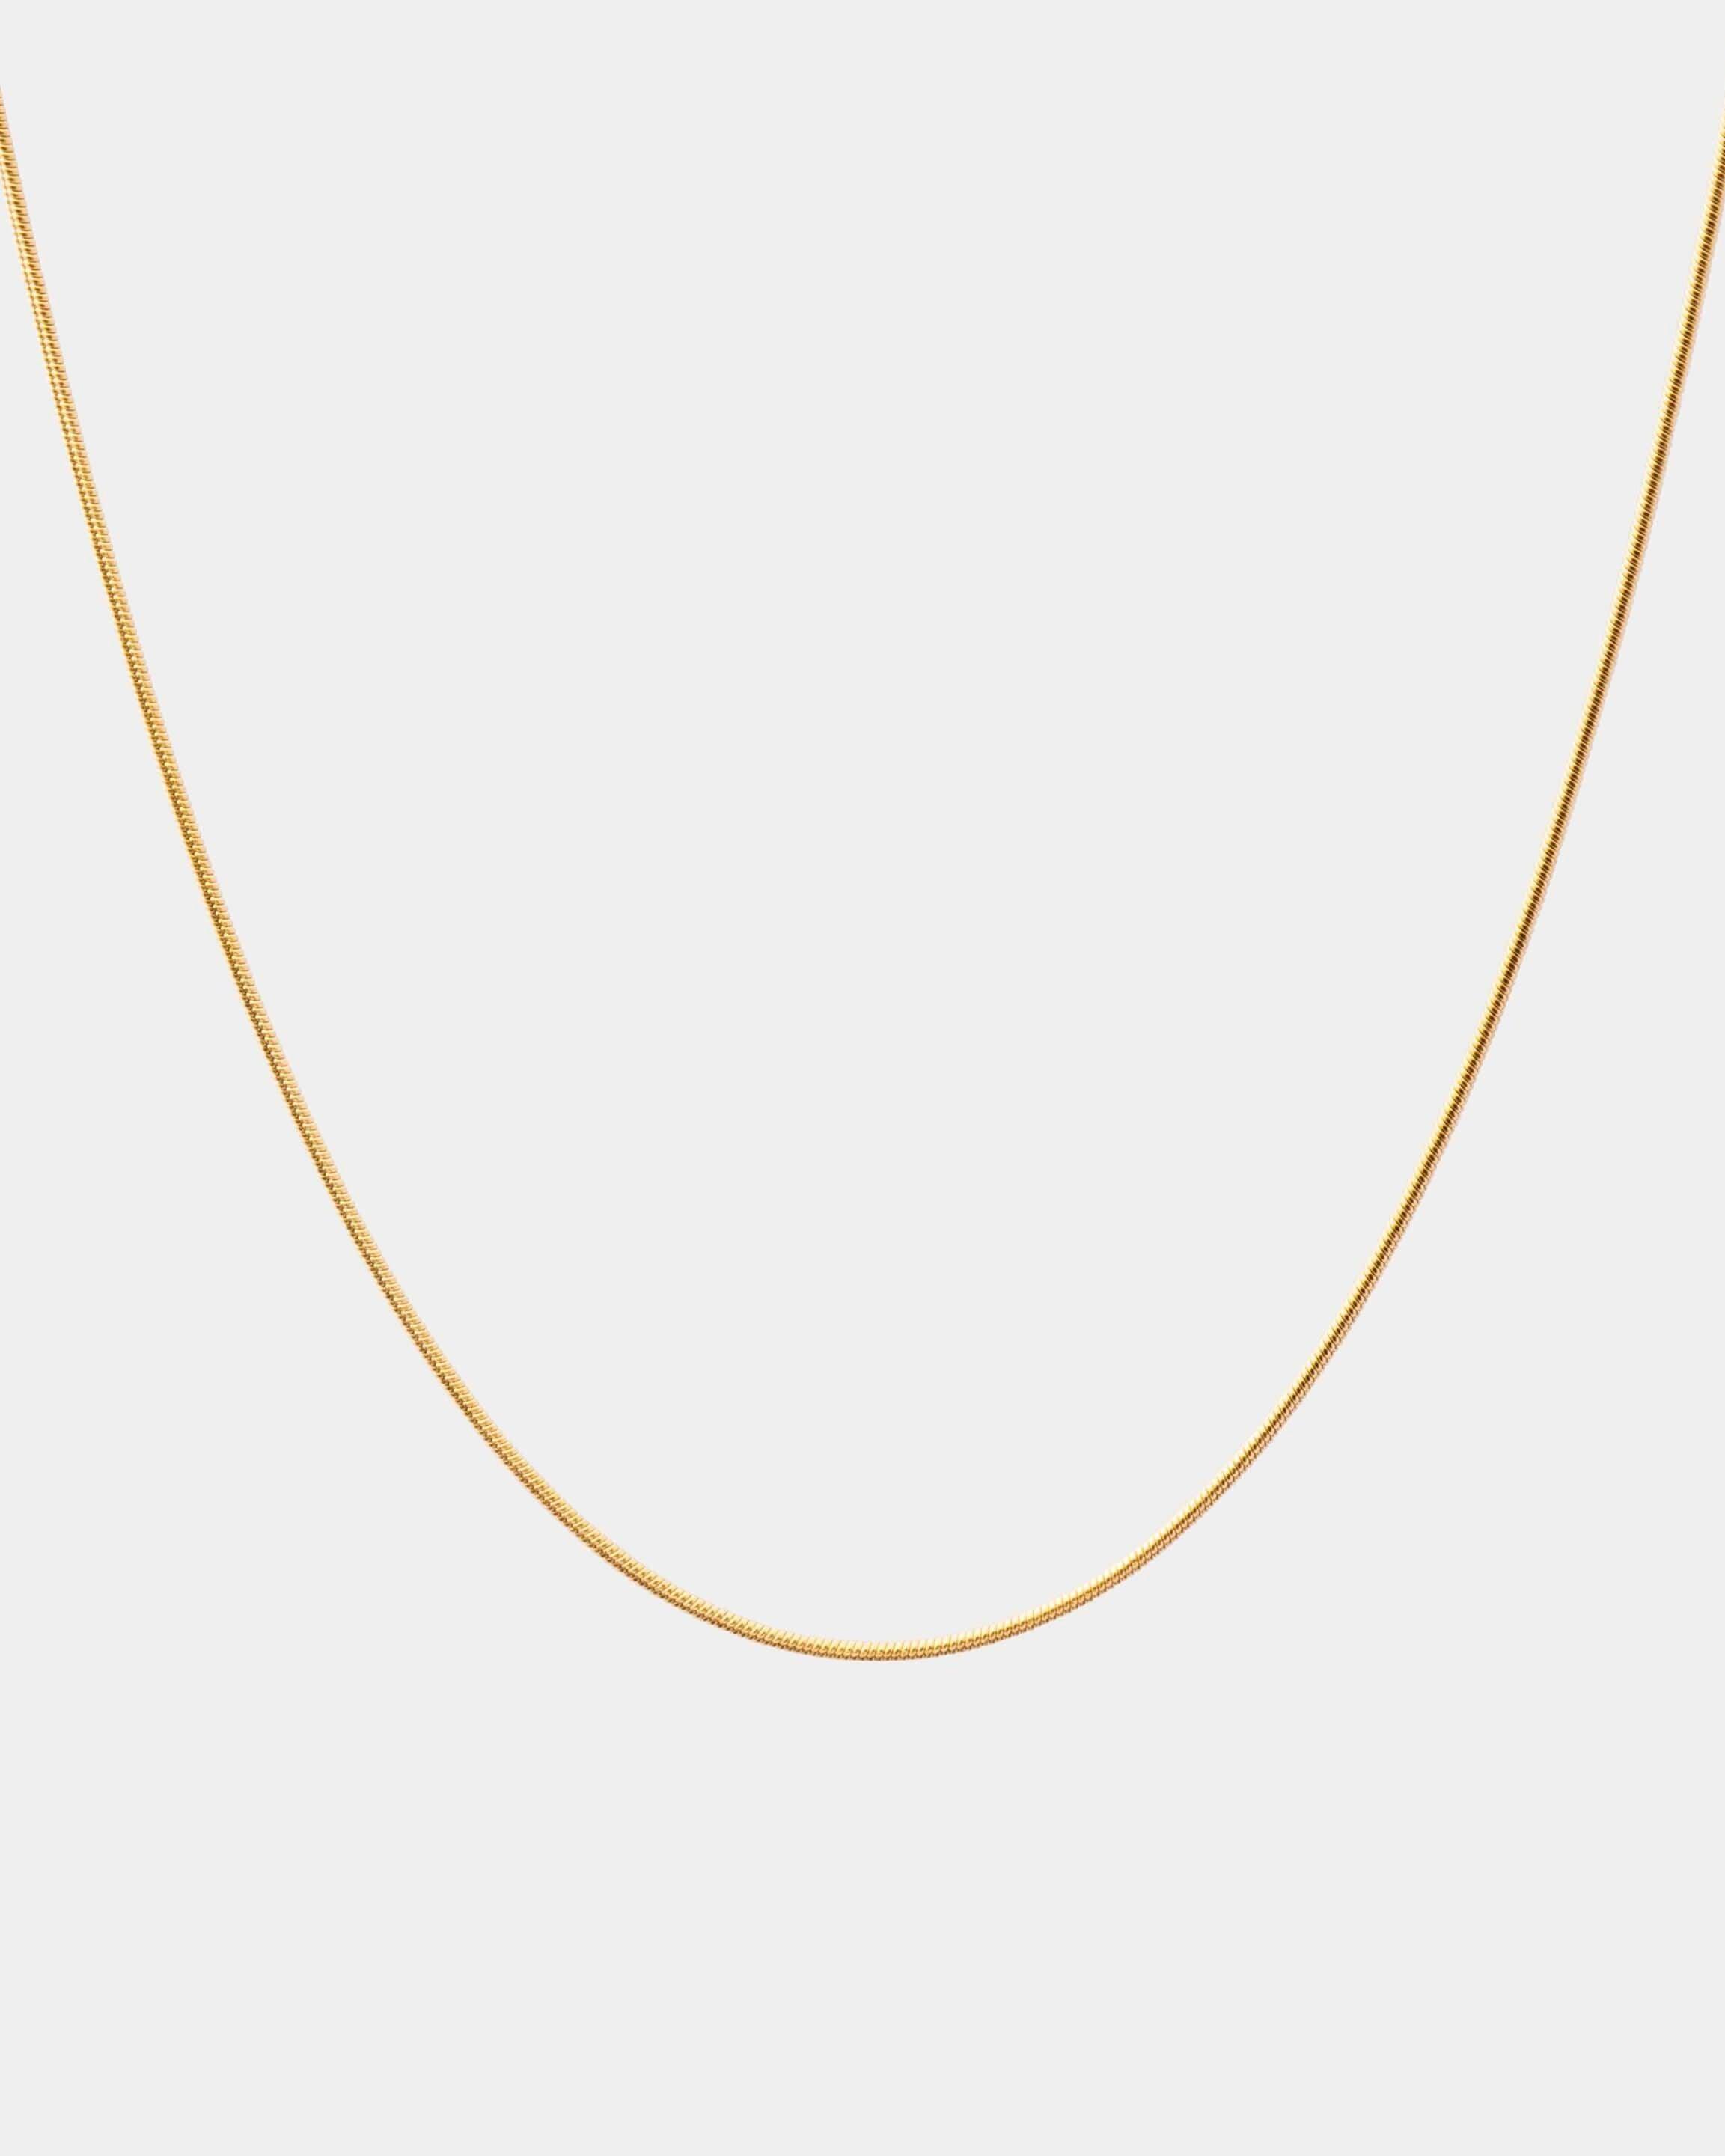 SNAKE CHAIN NECKLACE - LIMELY